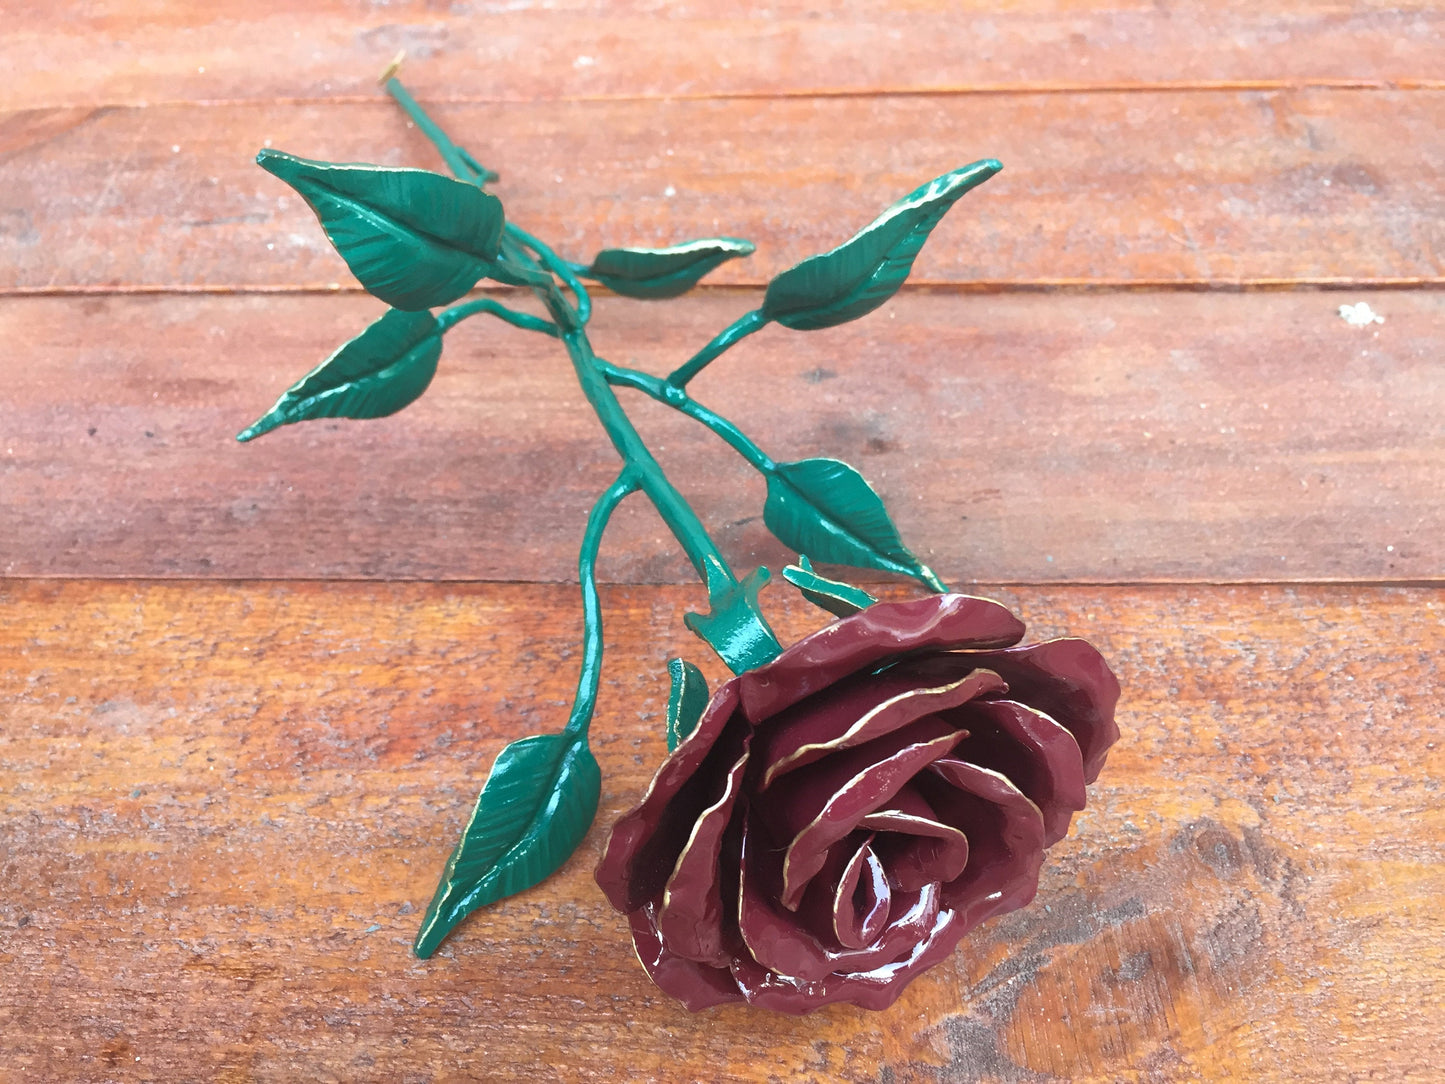 Iron flower, 6th anniversary gift for her, metal bouquet, iron rose, steel rose, metal rose, iron gifts, steel anniversary gift, hand forged